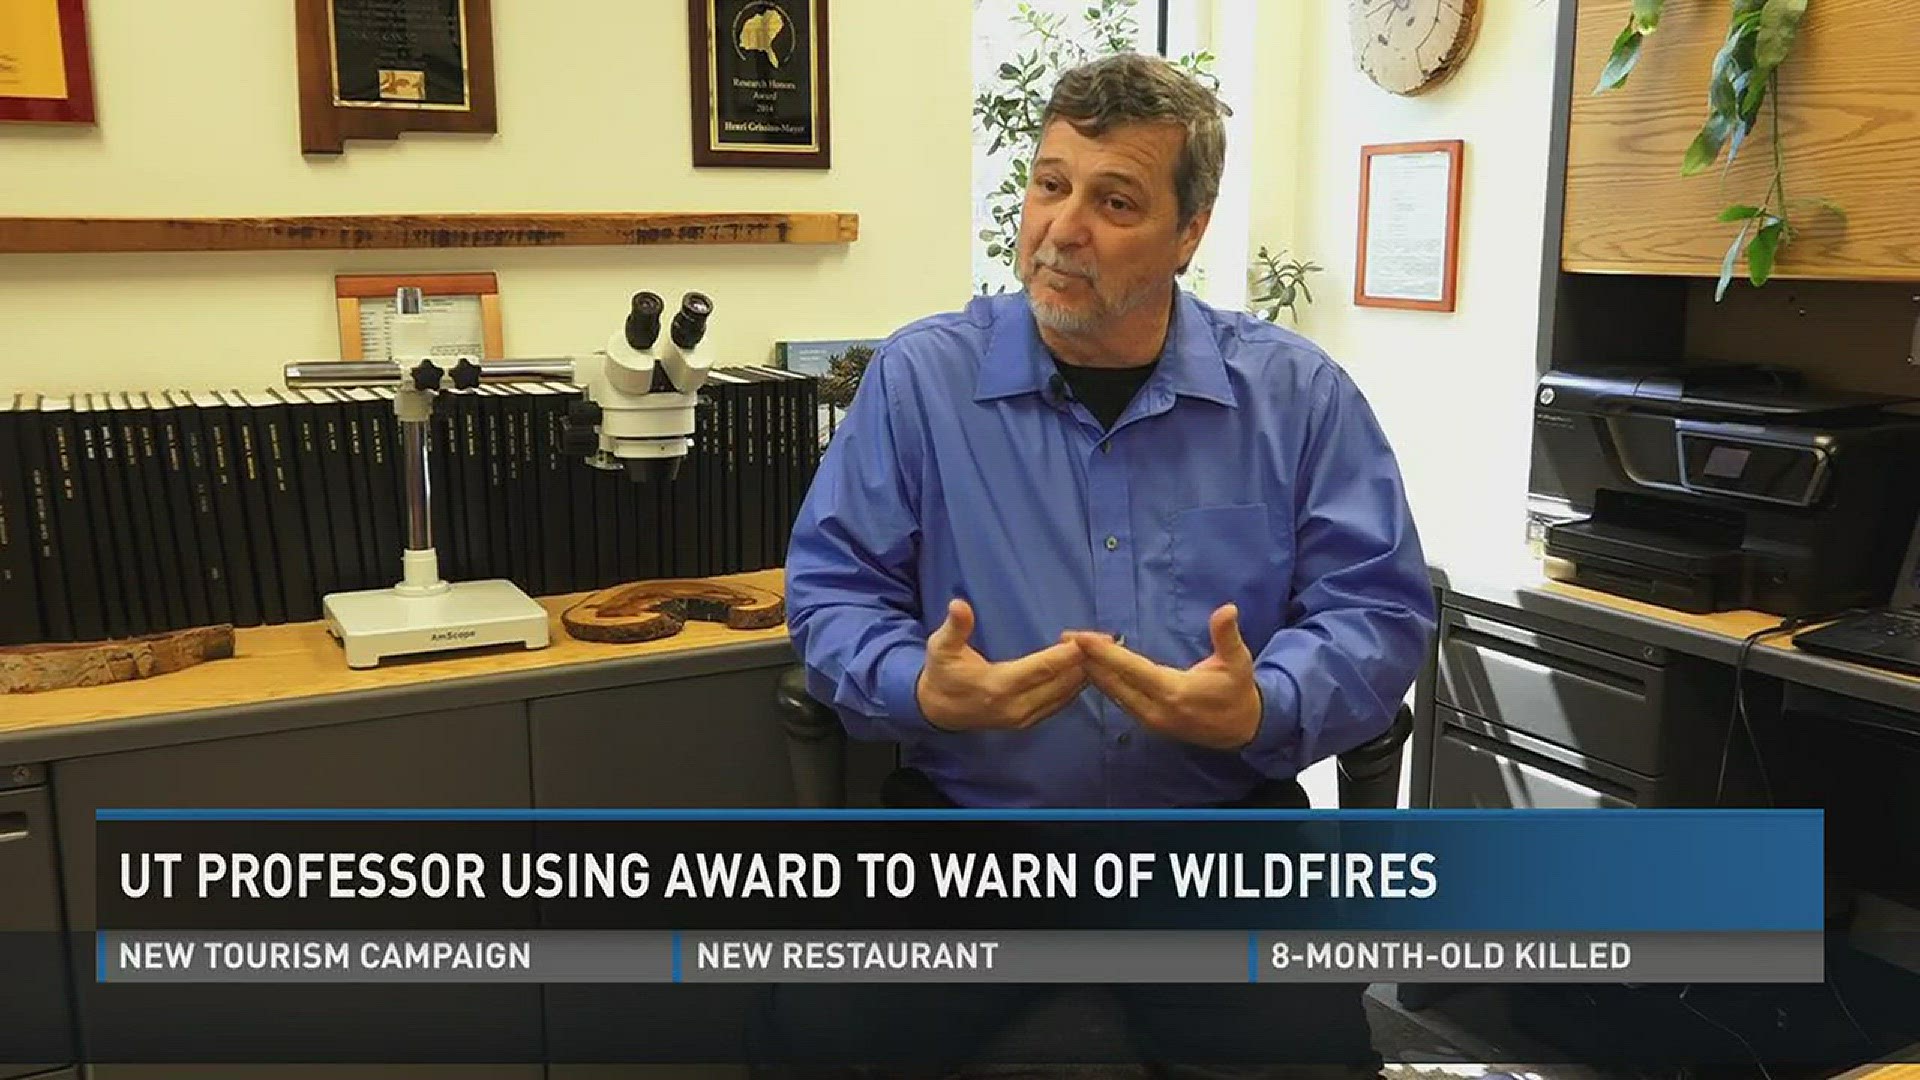 April 10, 2017: The UT professor who predicted the devastating Sevier County wildfires has won an award that he says will allow him to raise awareness about the danger of wildfires.